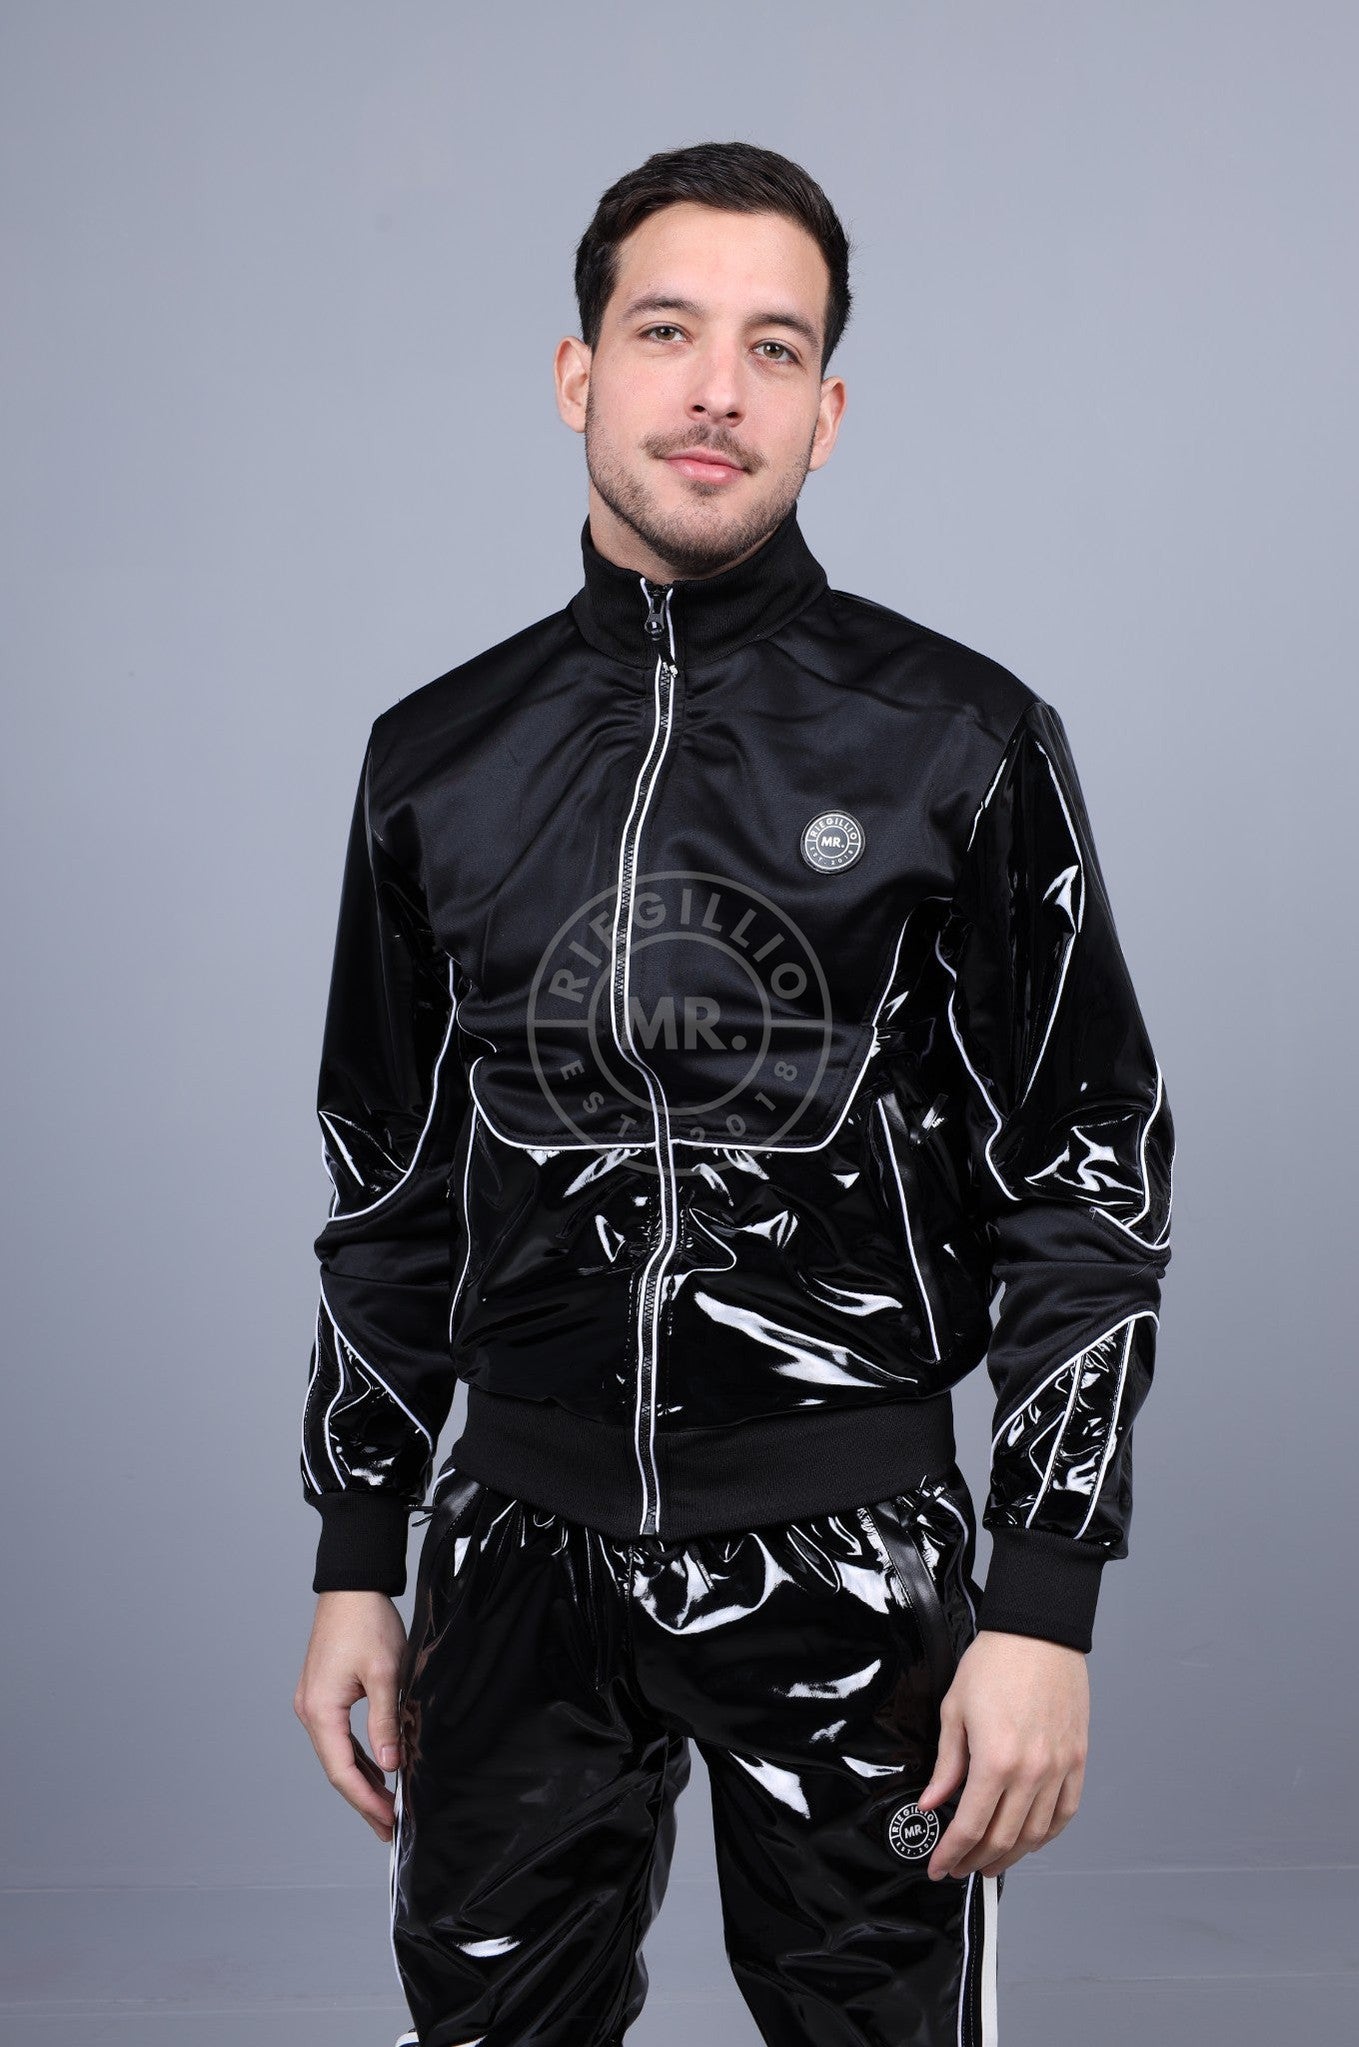 PVC 24 Tracksuit Jacket - Black with White Piping at MR. Riegillio